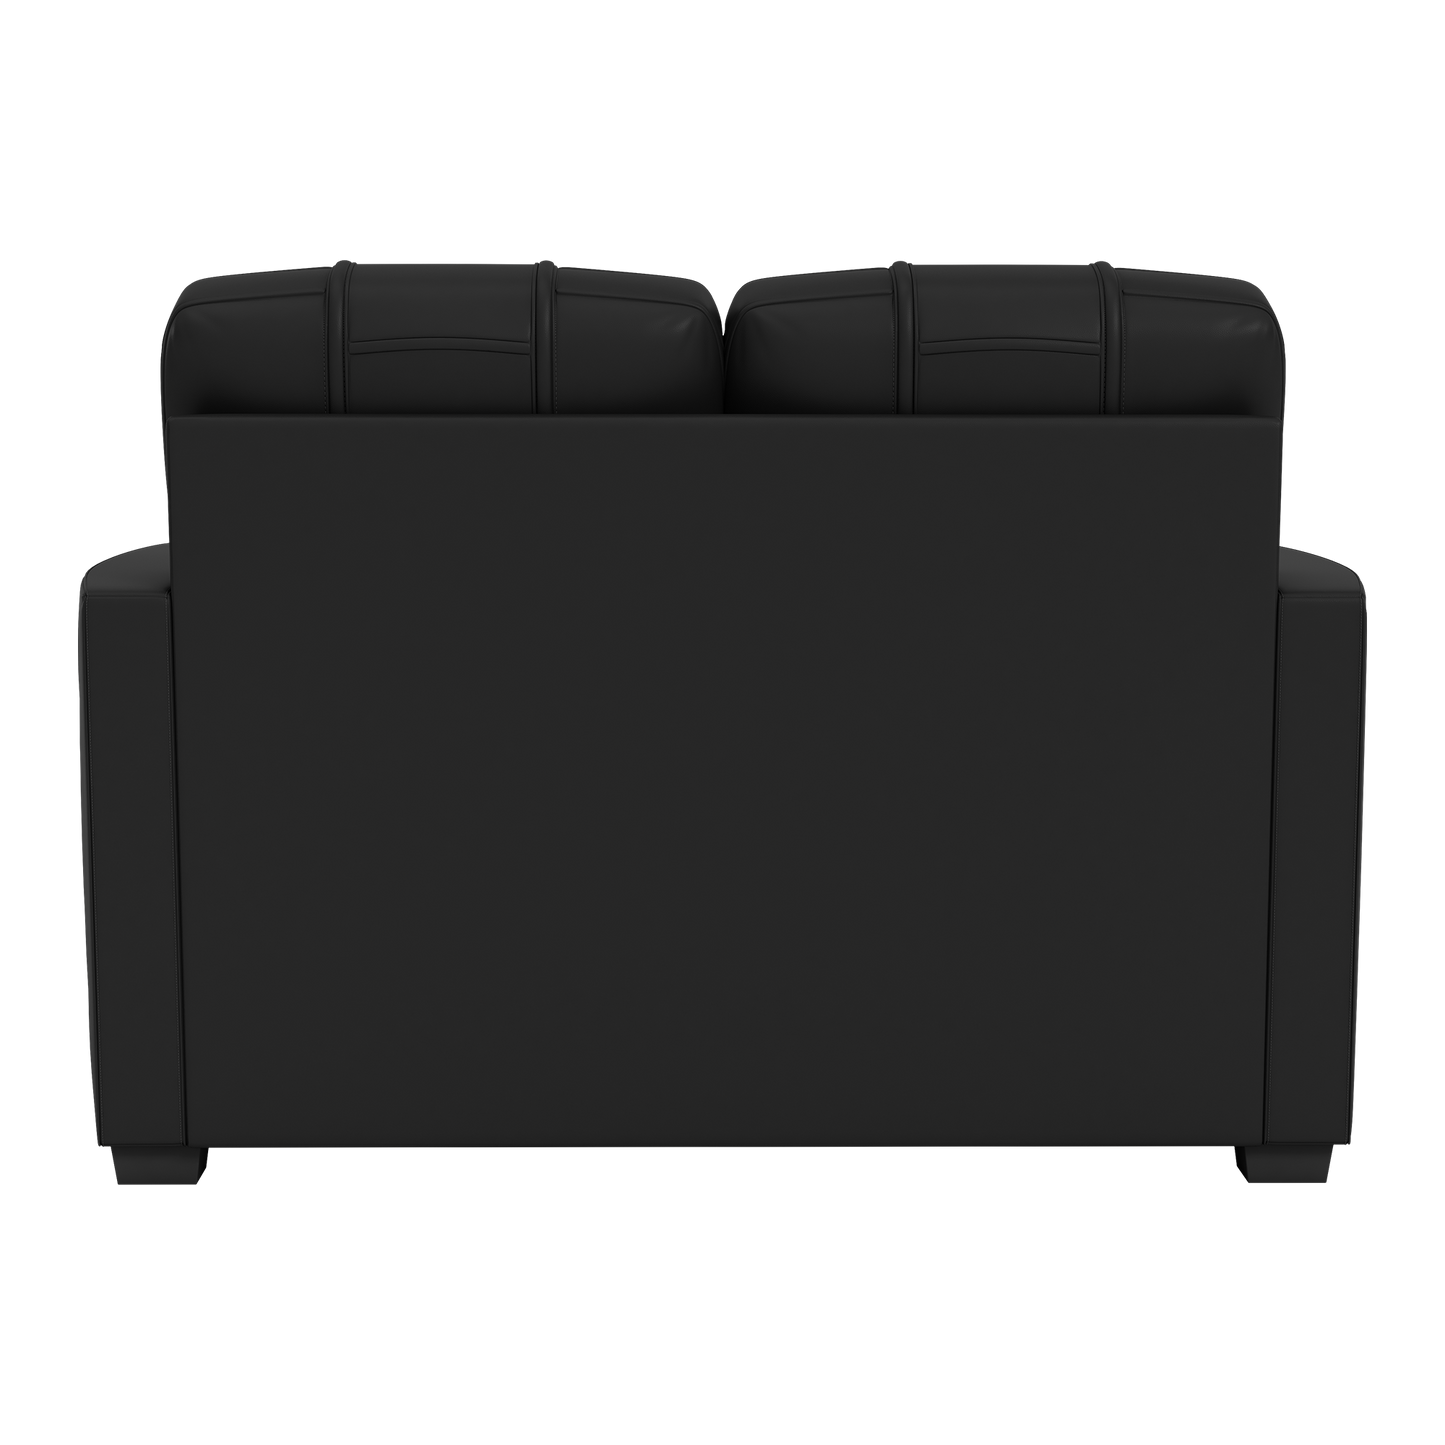 Silver Loveseat with Miami Marlins Alternate Logo Panel